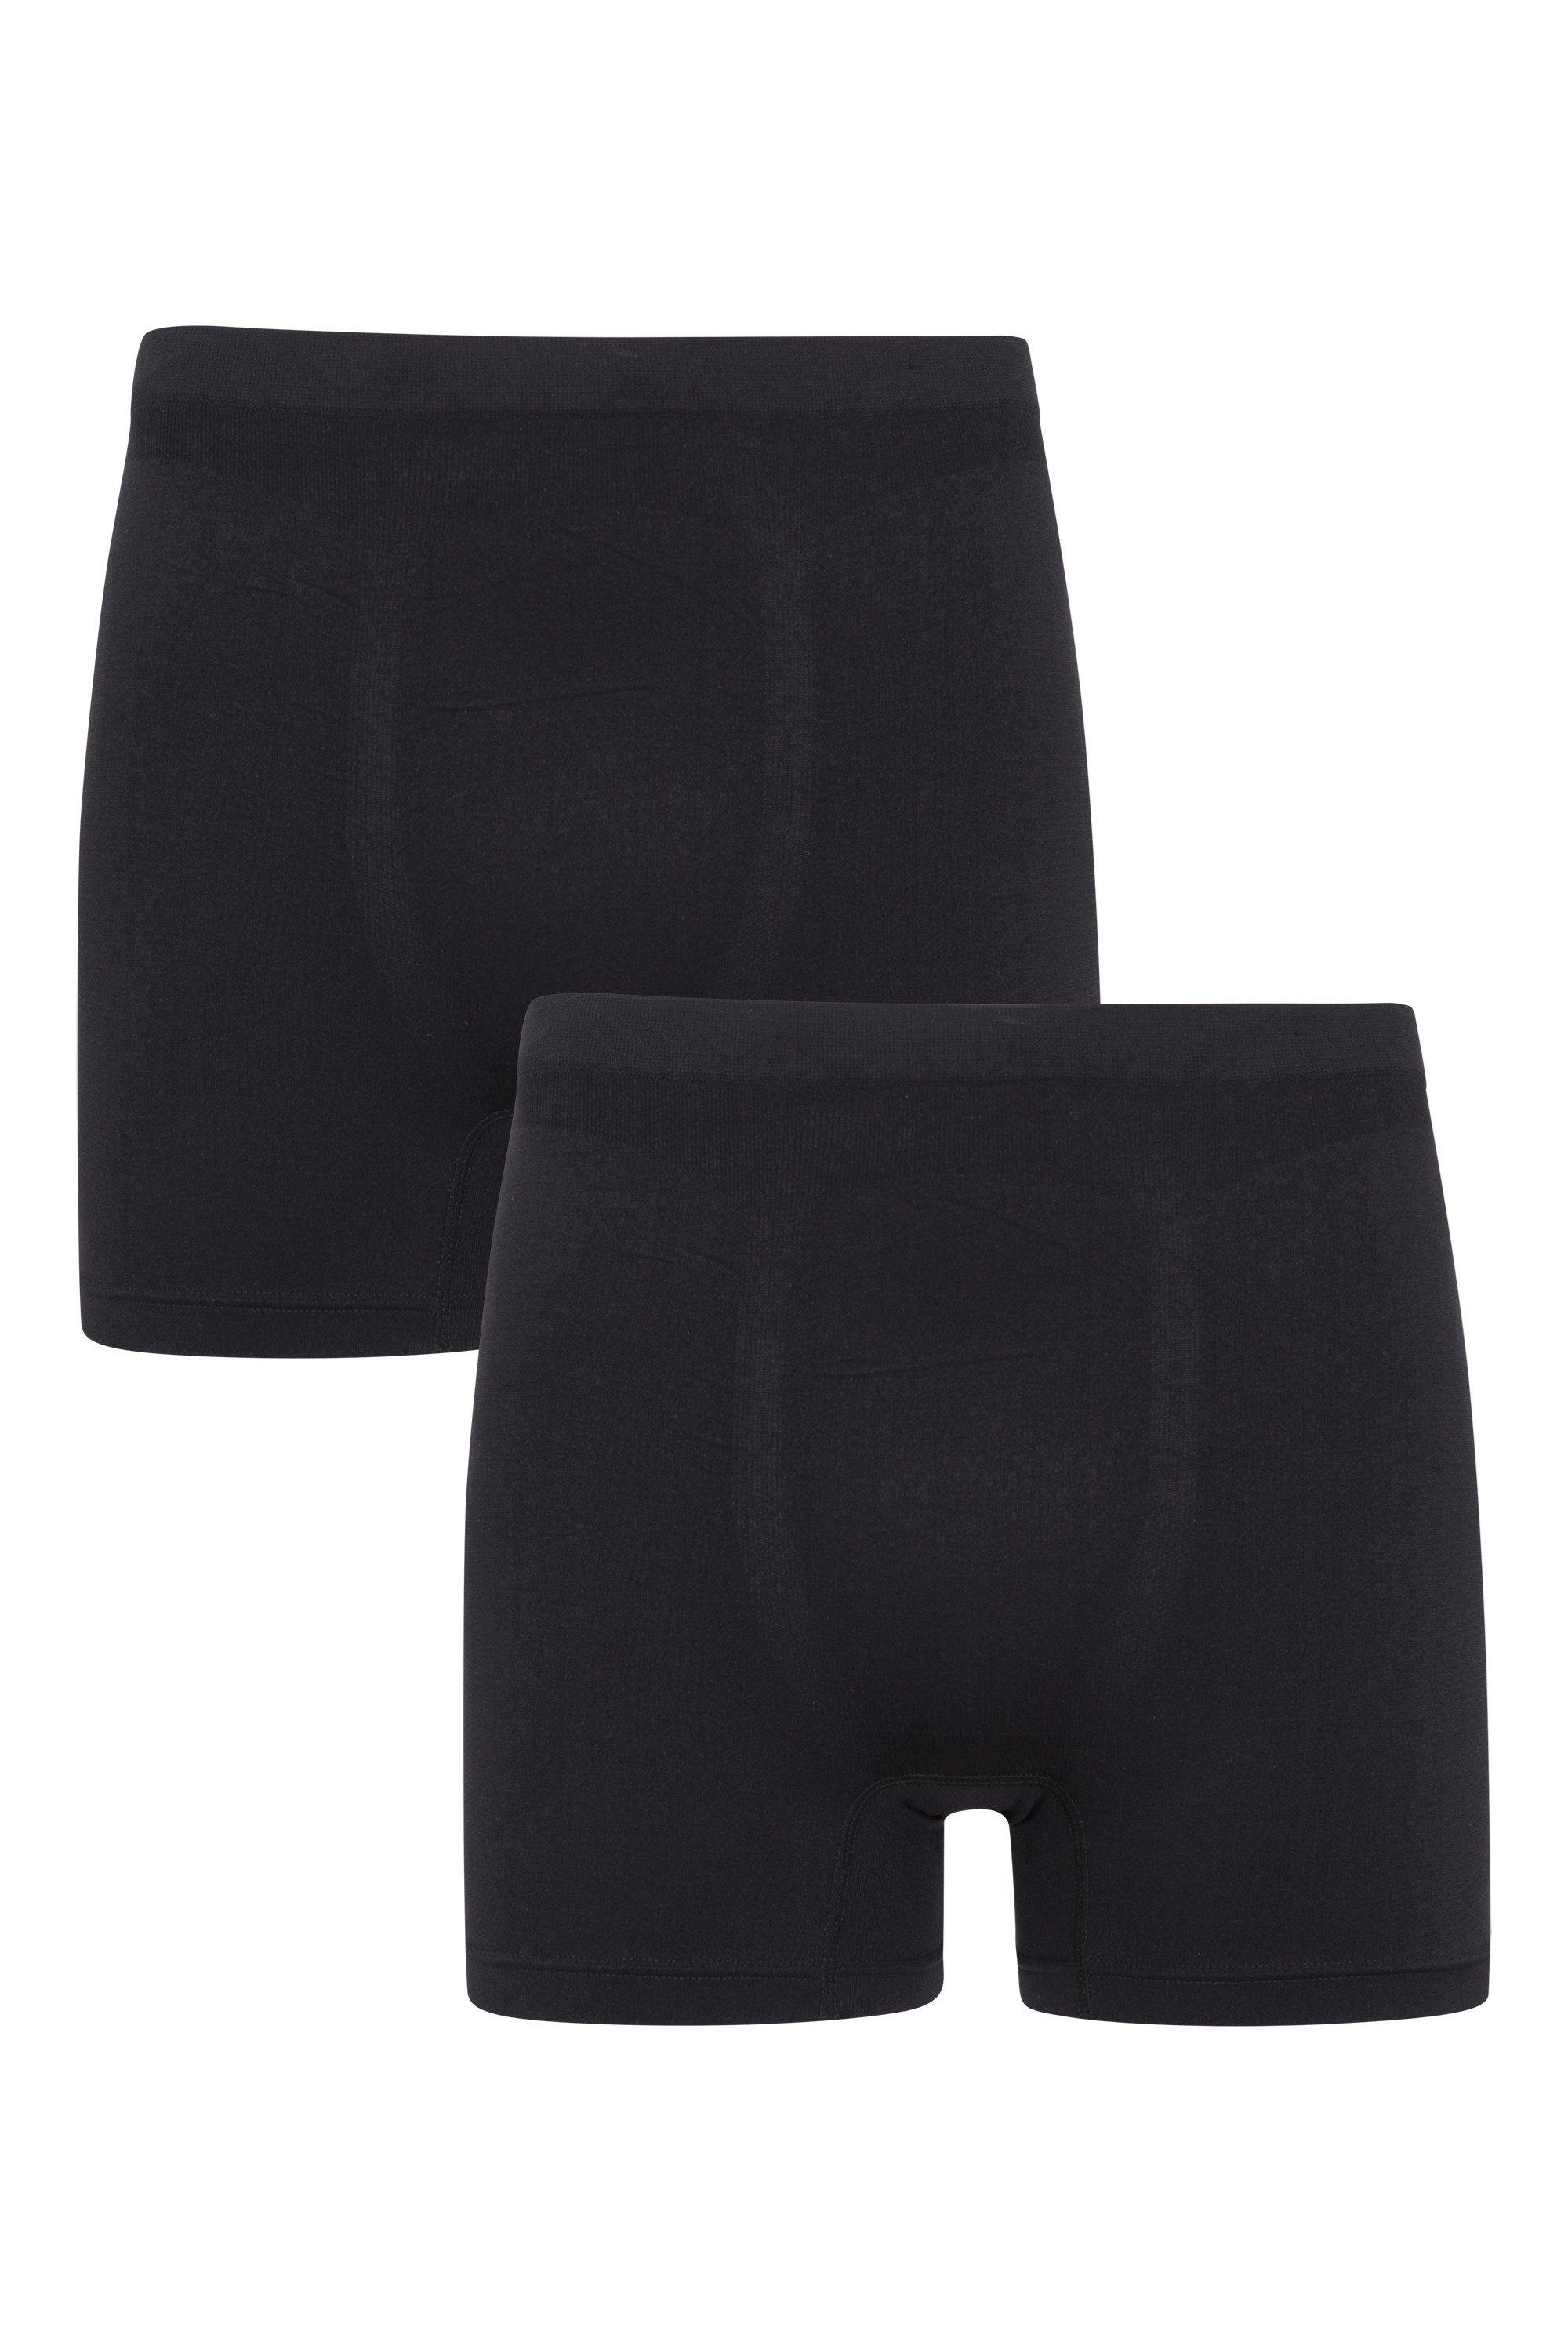 Seamless Boxers 2 Pack Quick Dry Stretchy Soft Underwear